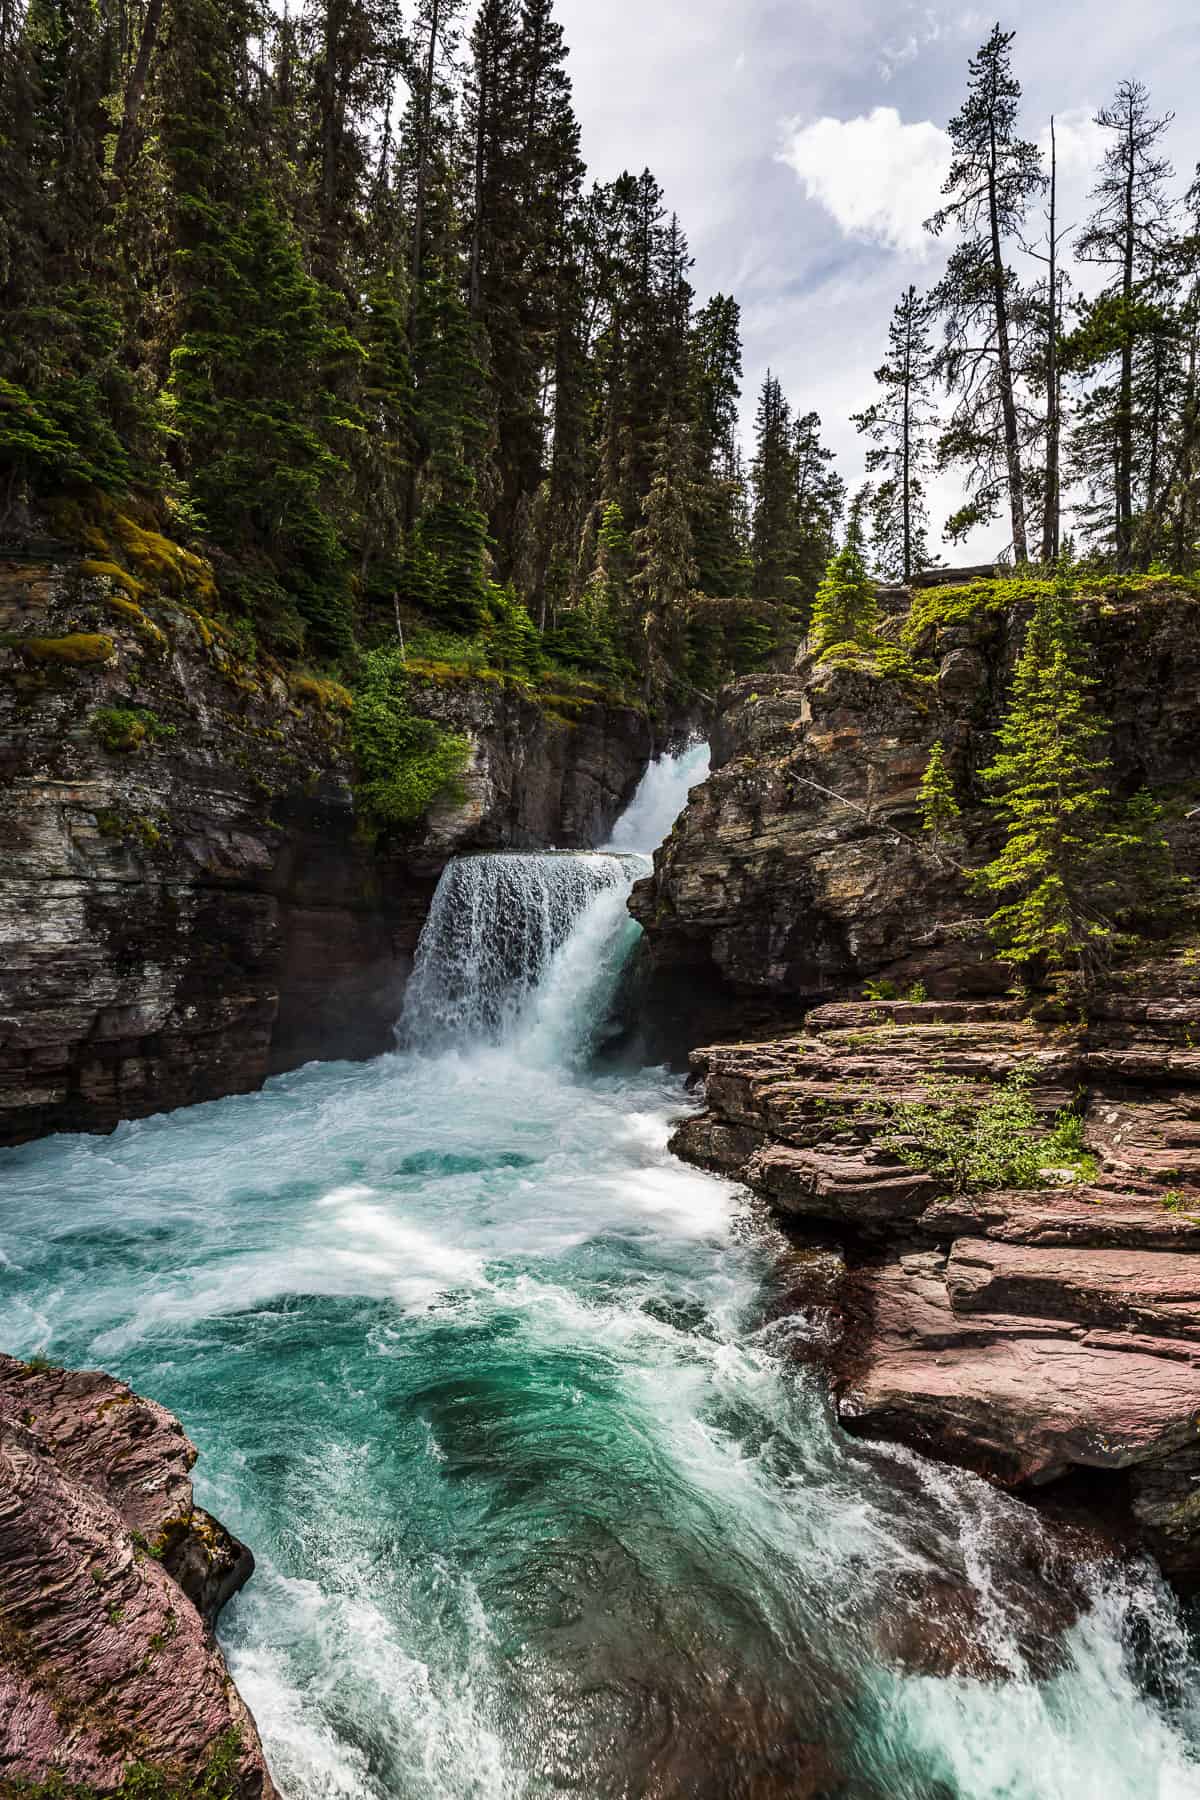 St. Mary's Falls in Glacier National Park.